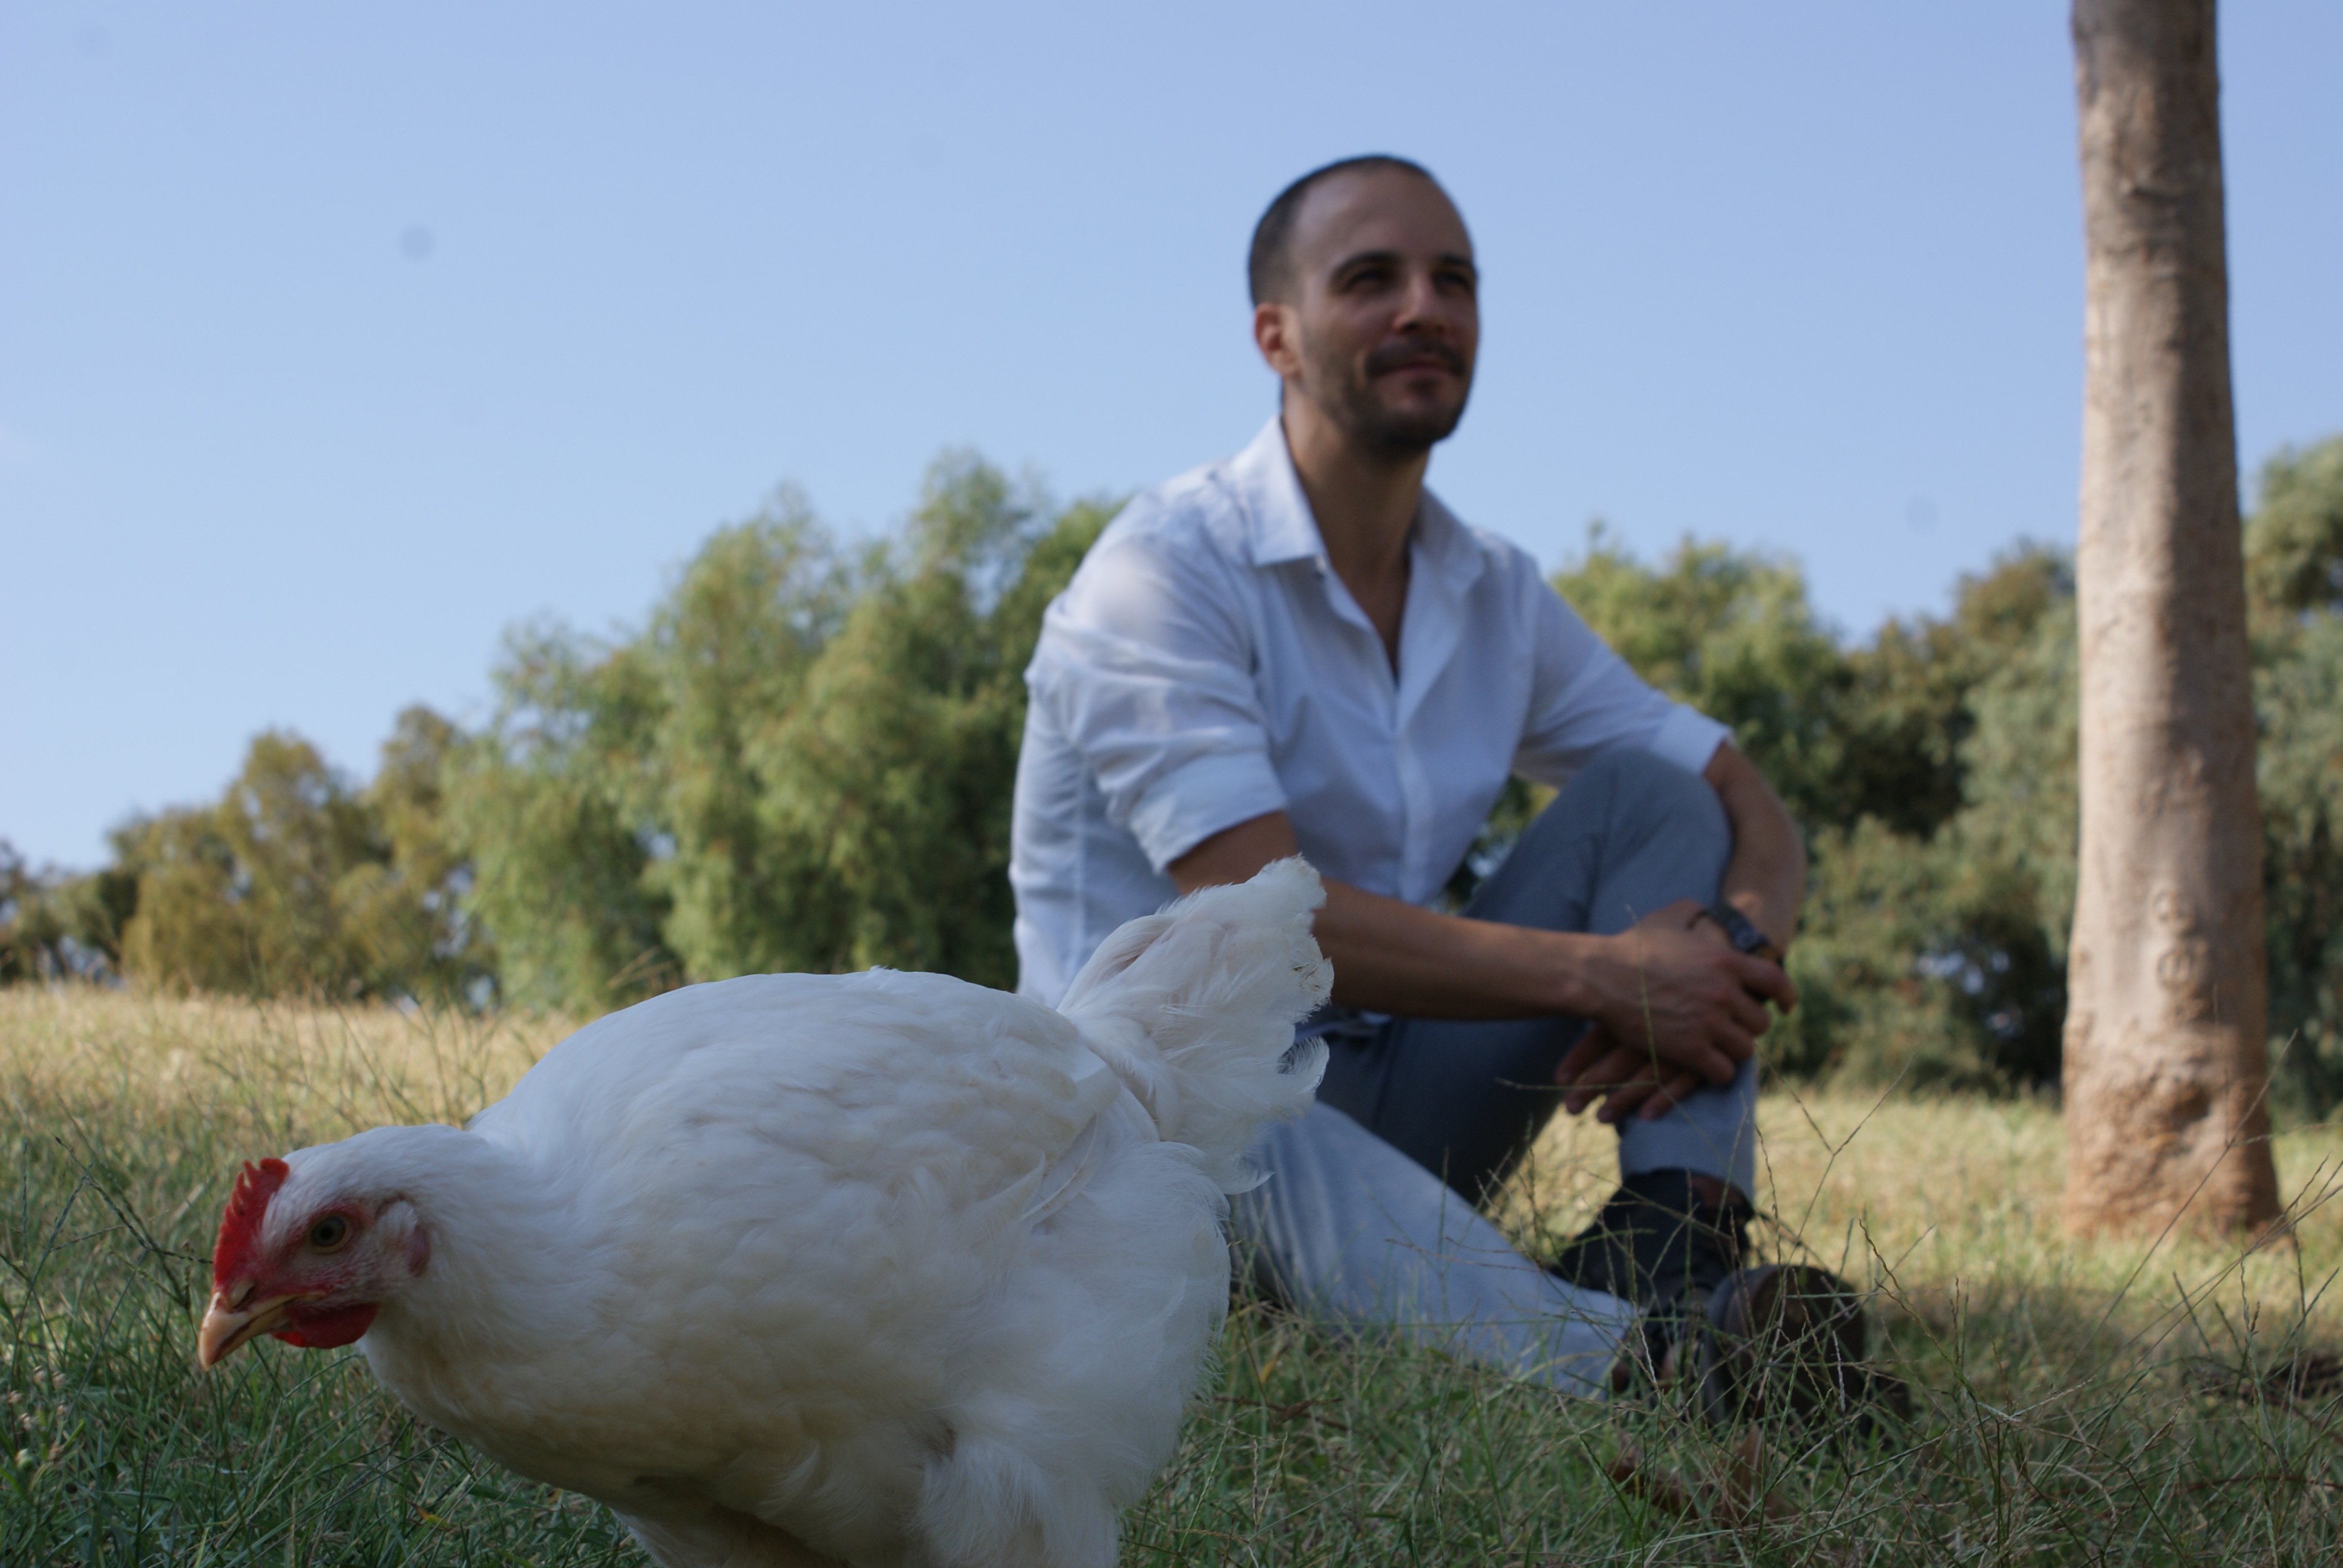 Lab-made meat startup SuperMeat raises $3M seed to develop ‘clean’ chicken